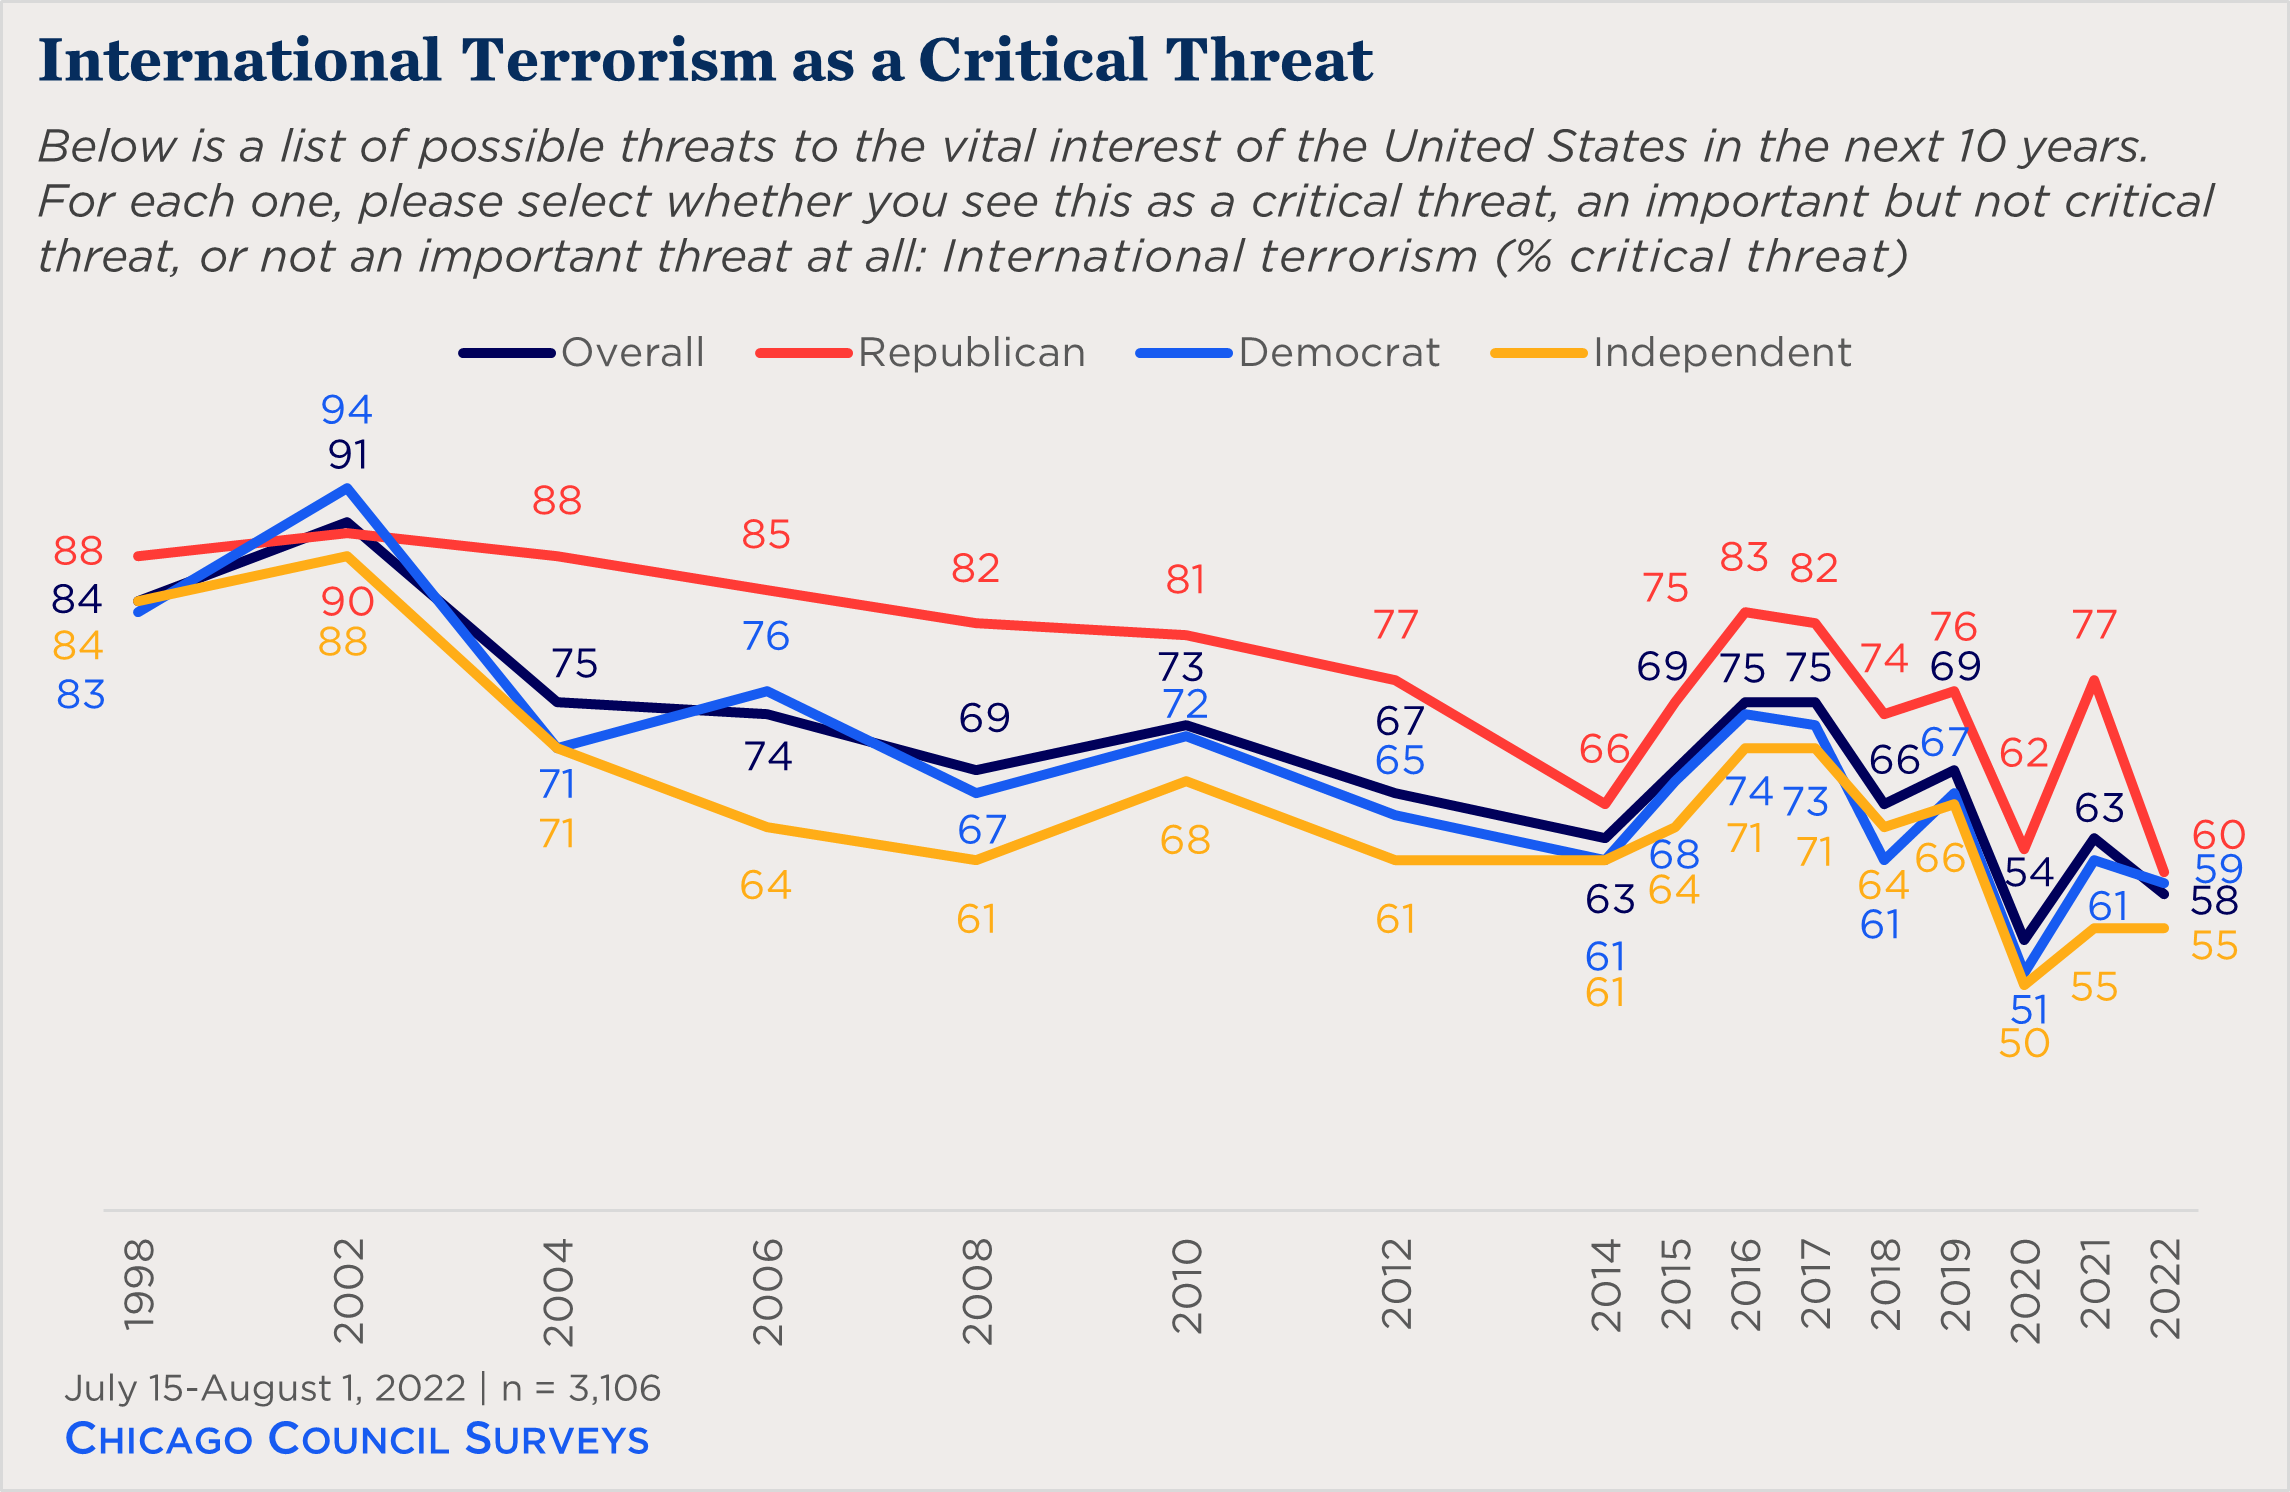 "a line chart showing partisan views of terrorism as a critical threat over time"